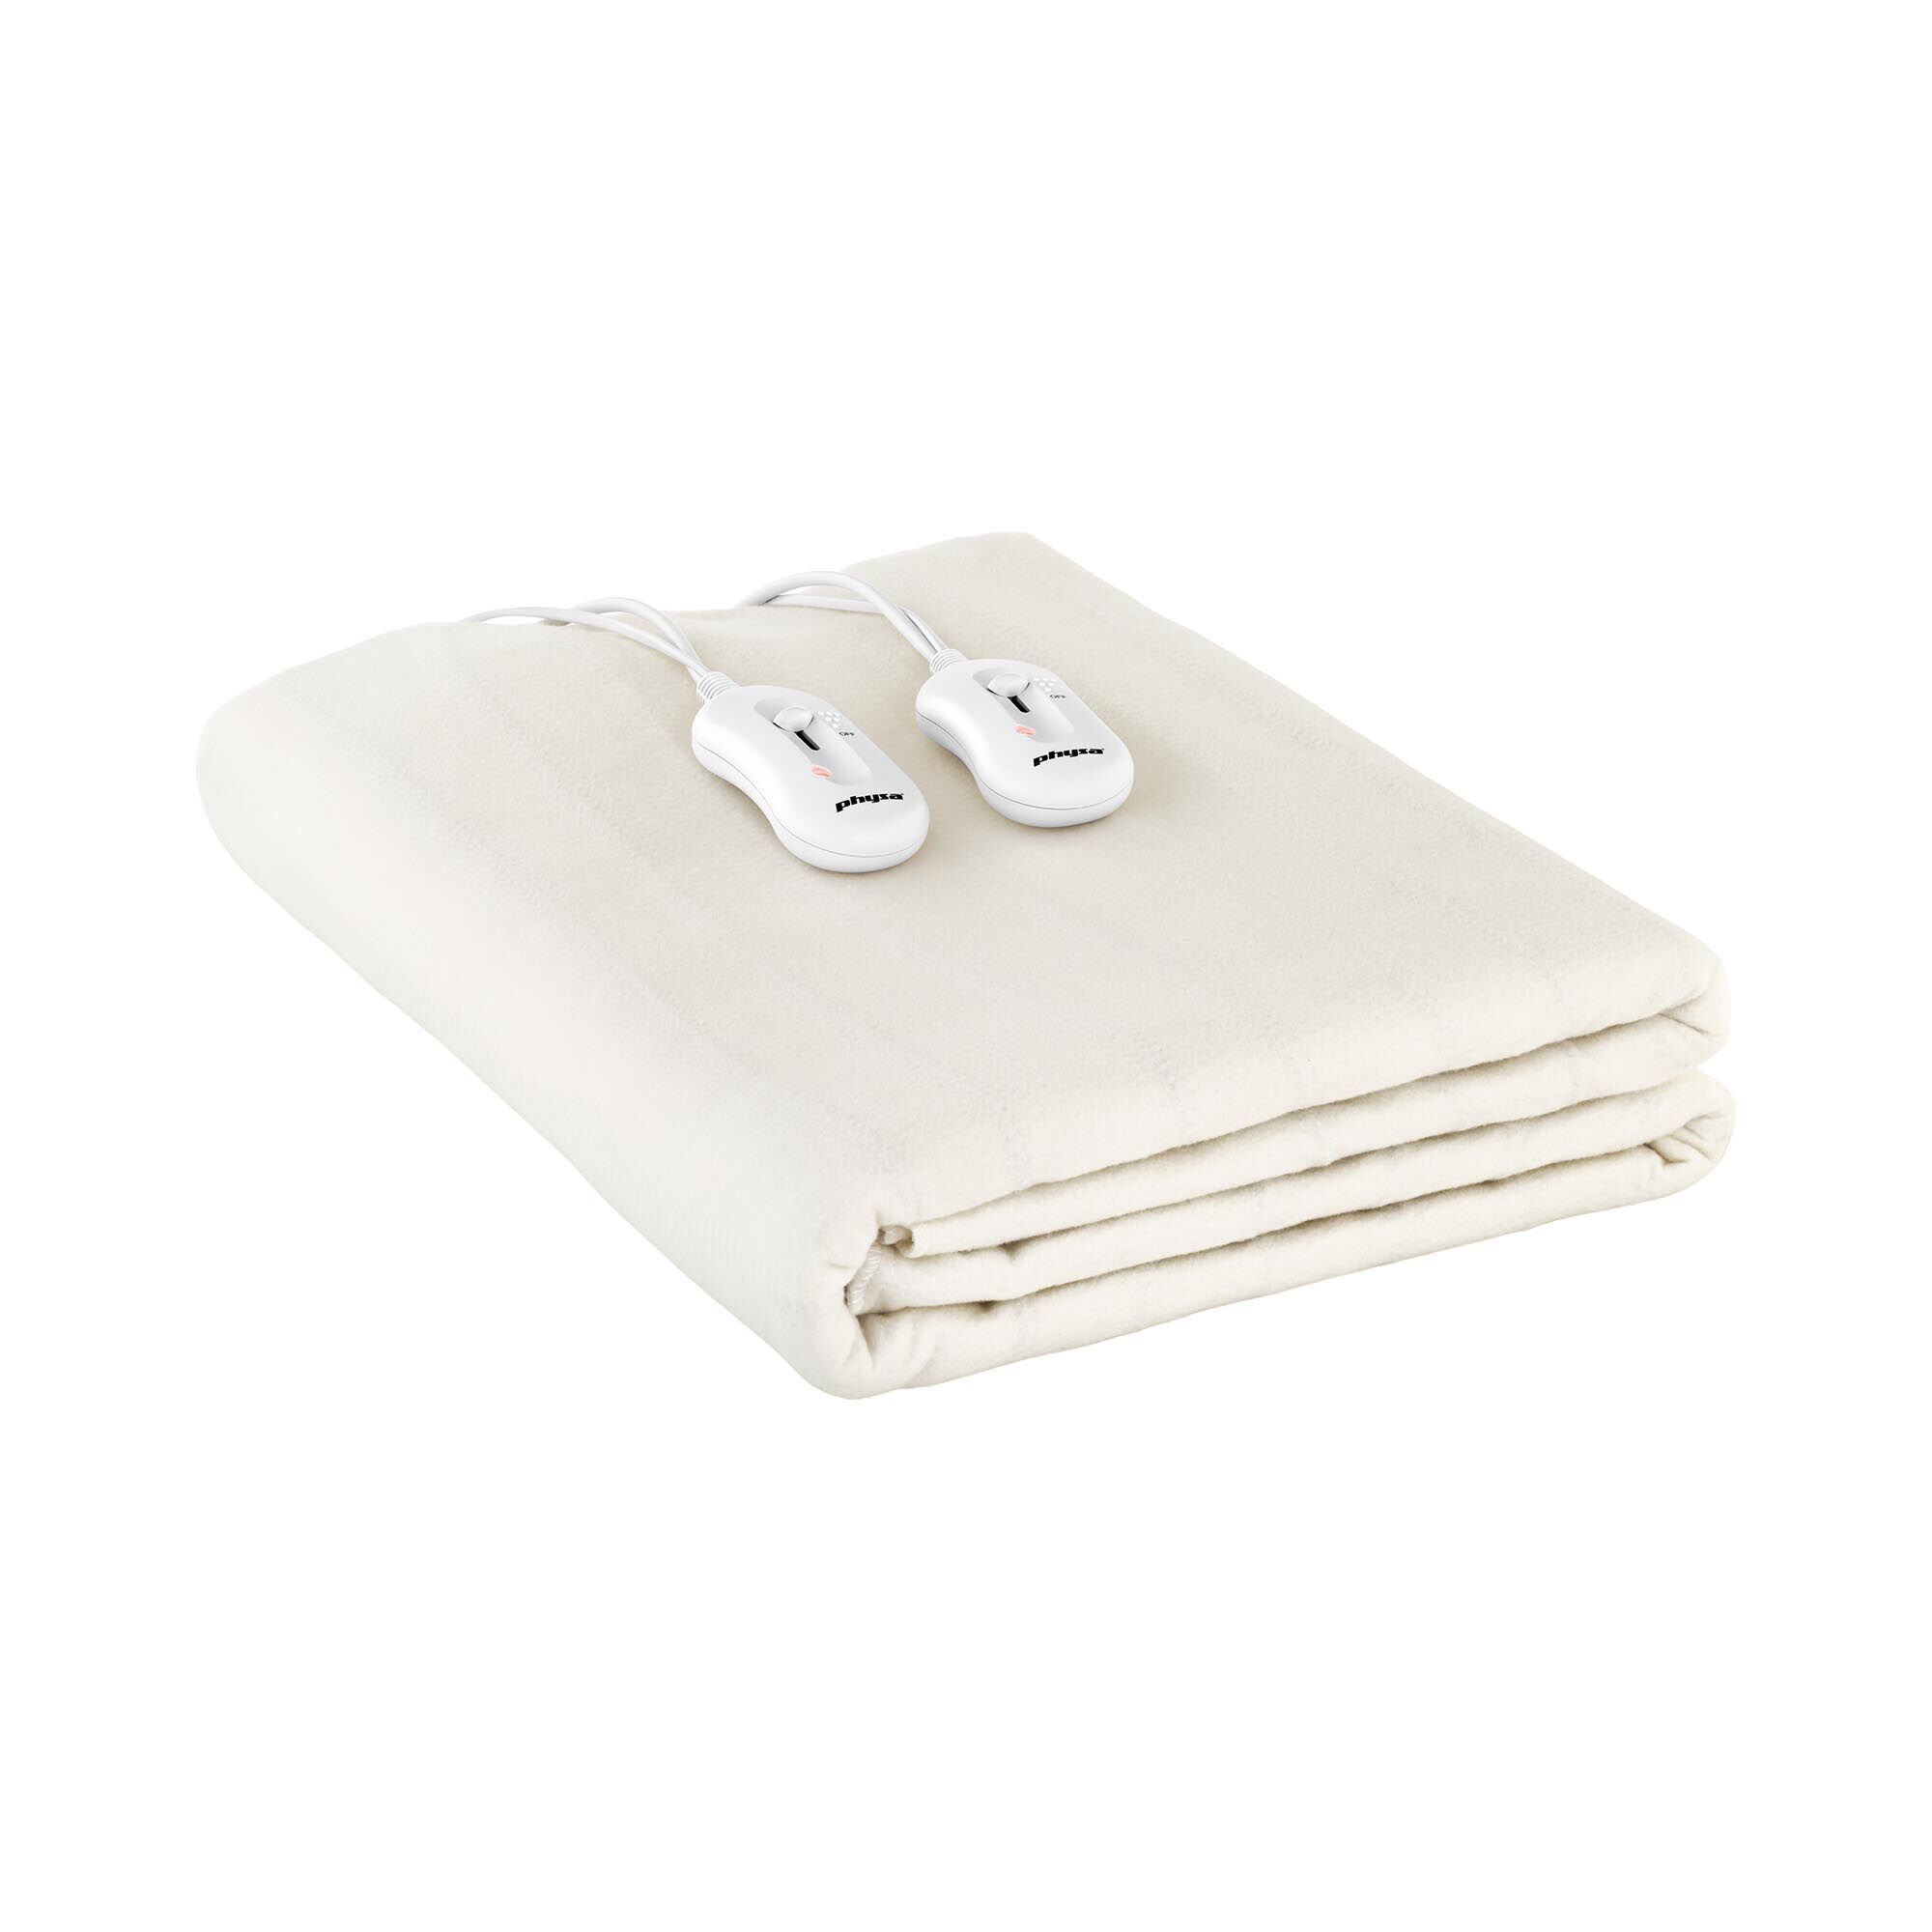 physa Electric blanket 203 x 152 cm - 2 heat zones PHY-HB130-1